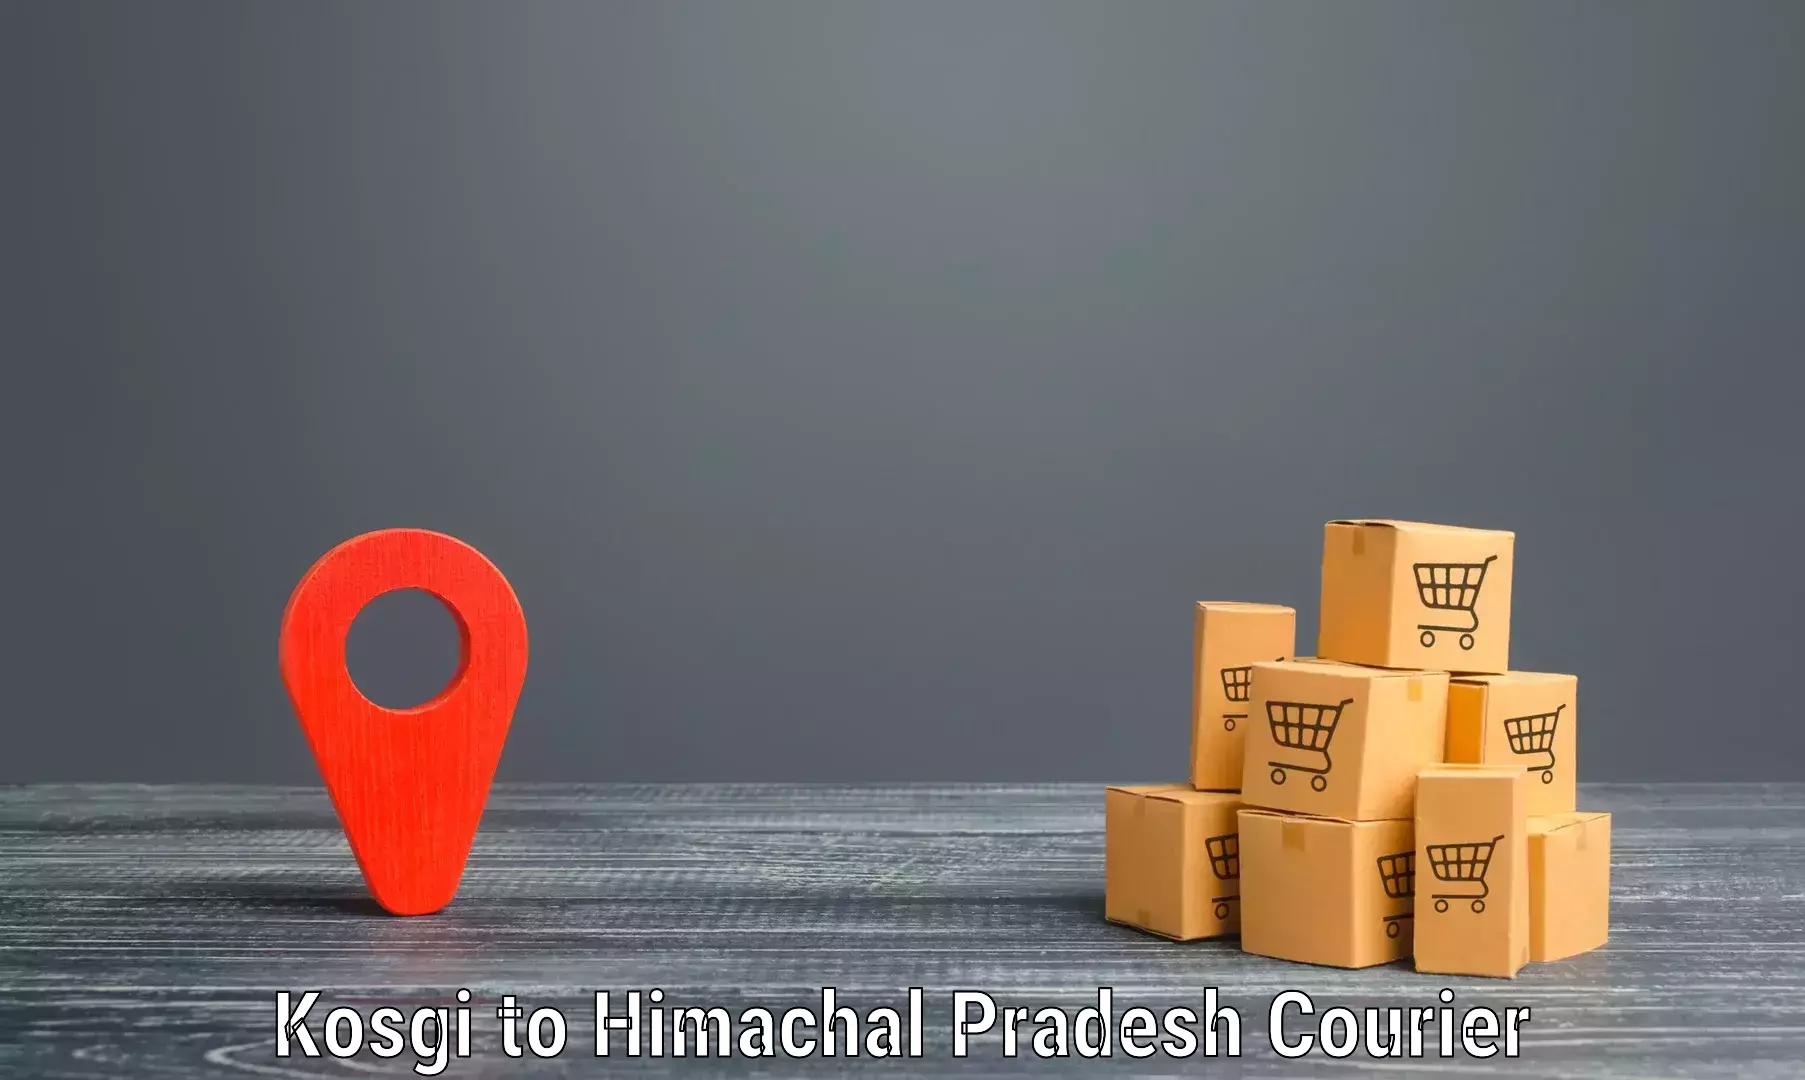 Full-service courier options Kosgi to Dharamshala